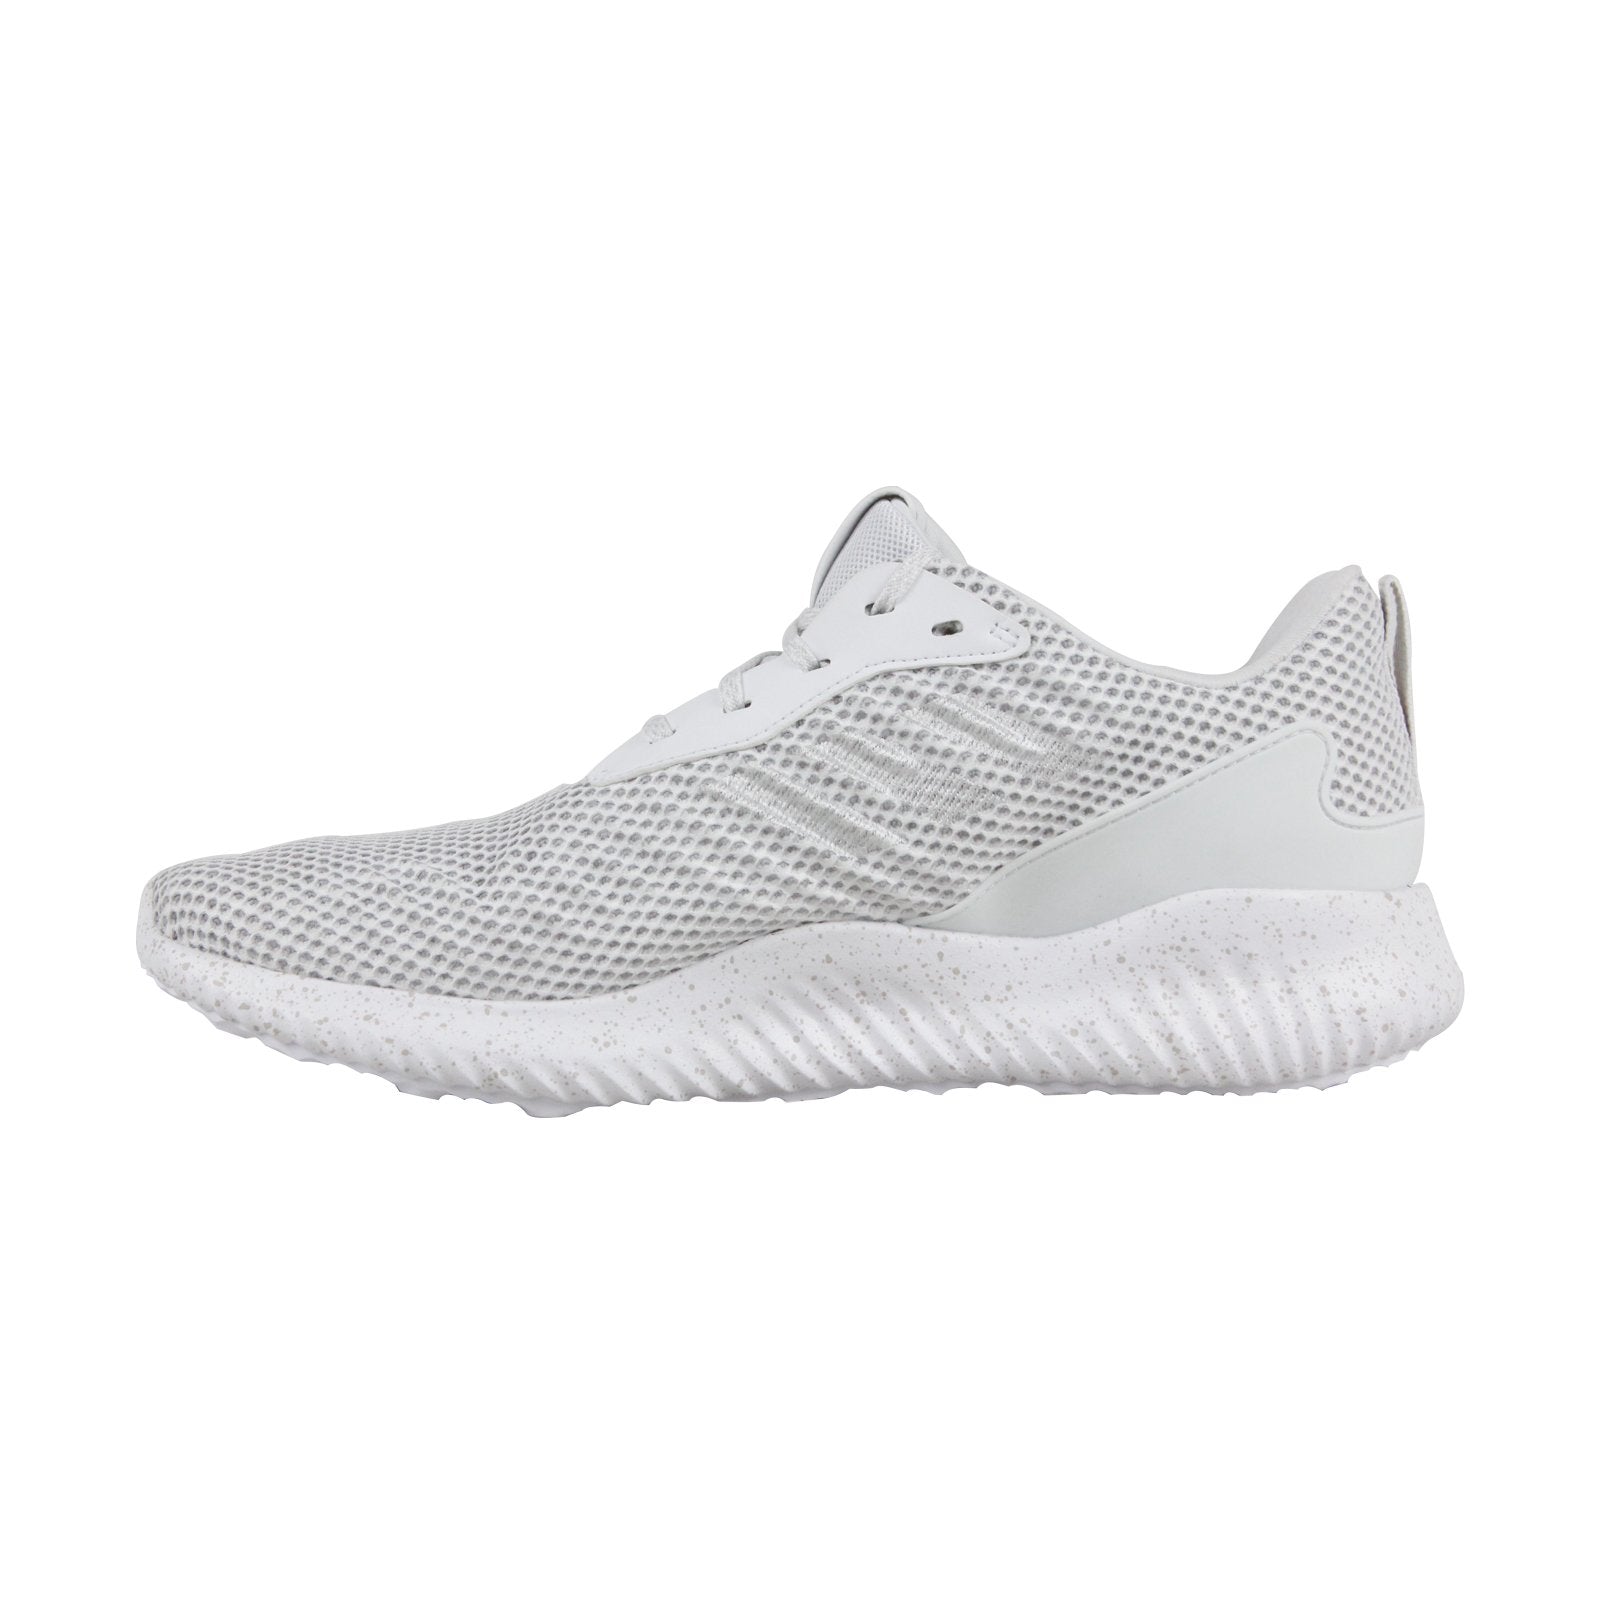 En cantidad claro montaje Adidas Alphabounce Rc CG5125 Mens White Mesh Lace Up Athletic Running -  Ruze Shoes